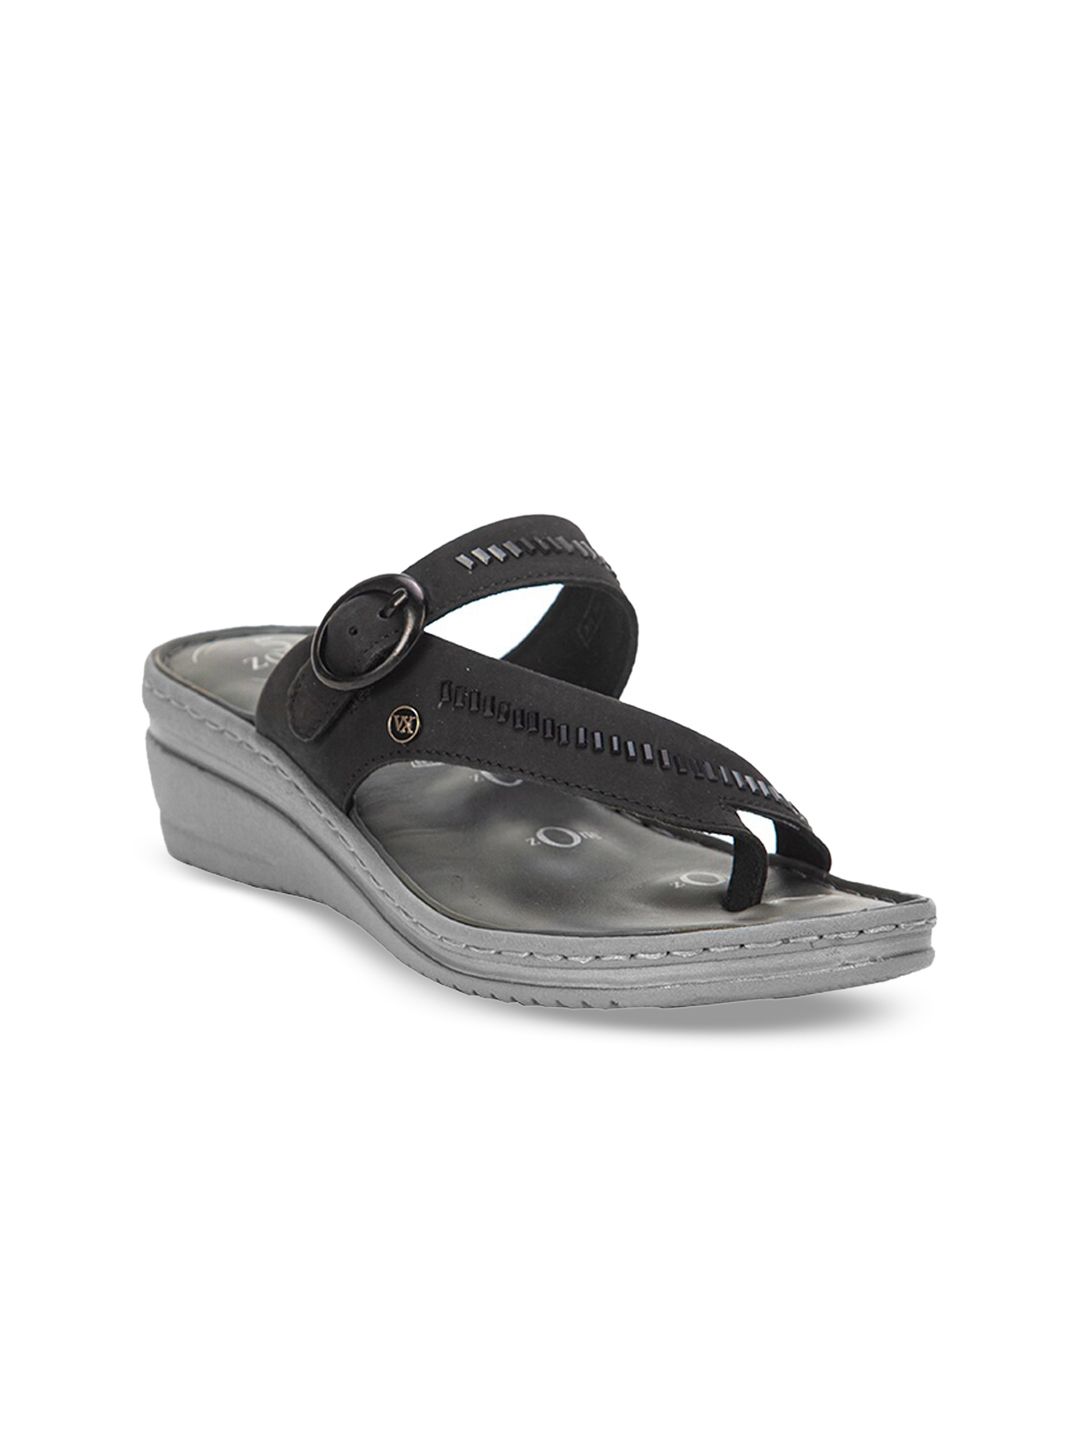 VON WELLX GERMANY Women Black & Grey Leather Embellished Sandals Price in India